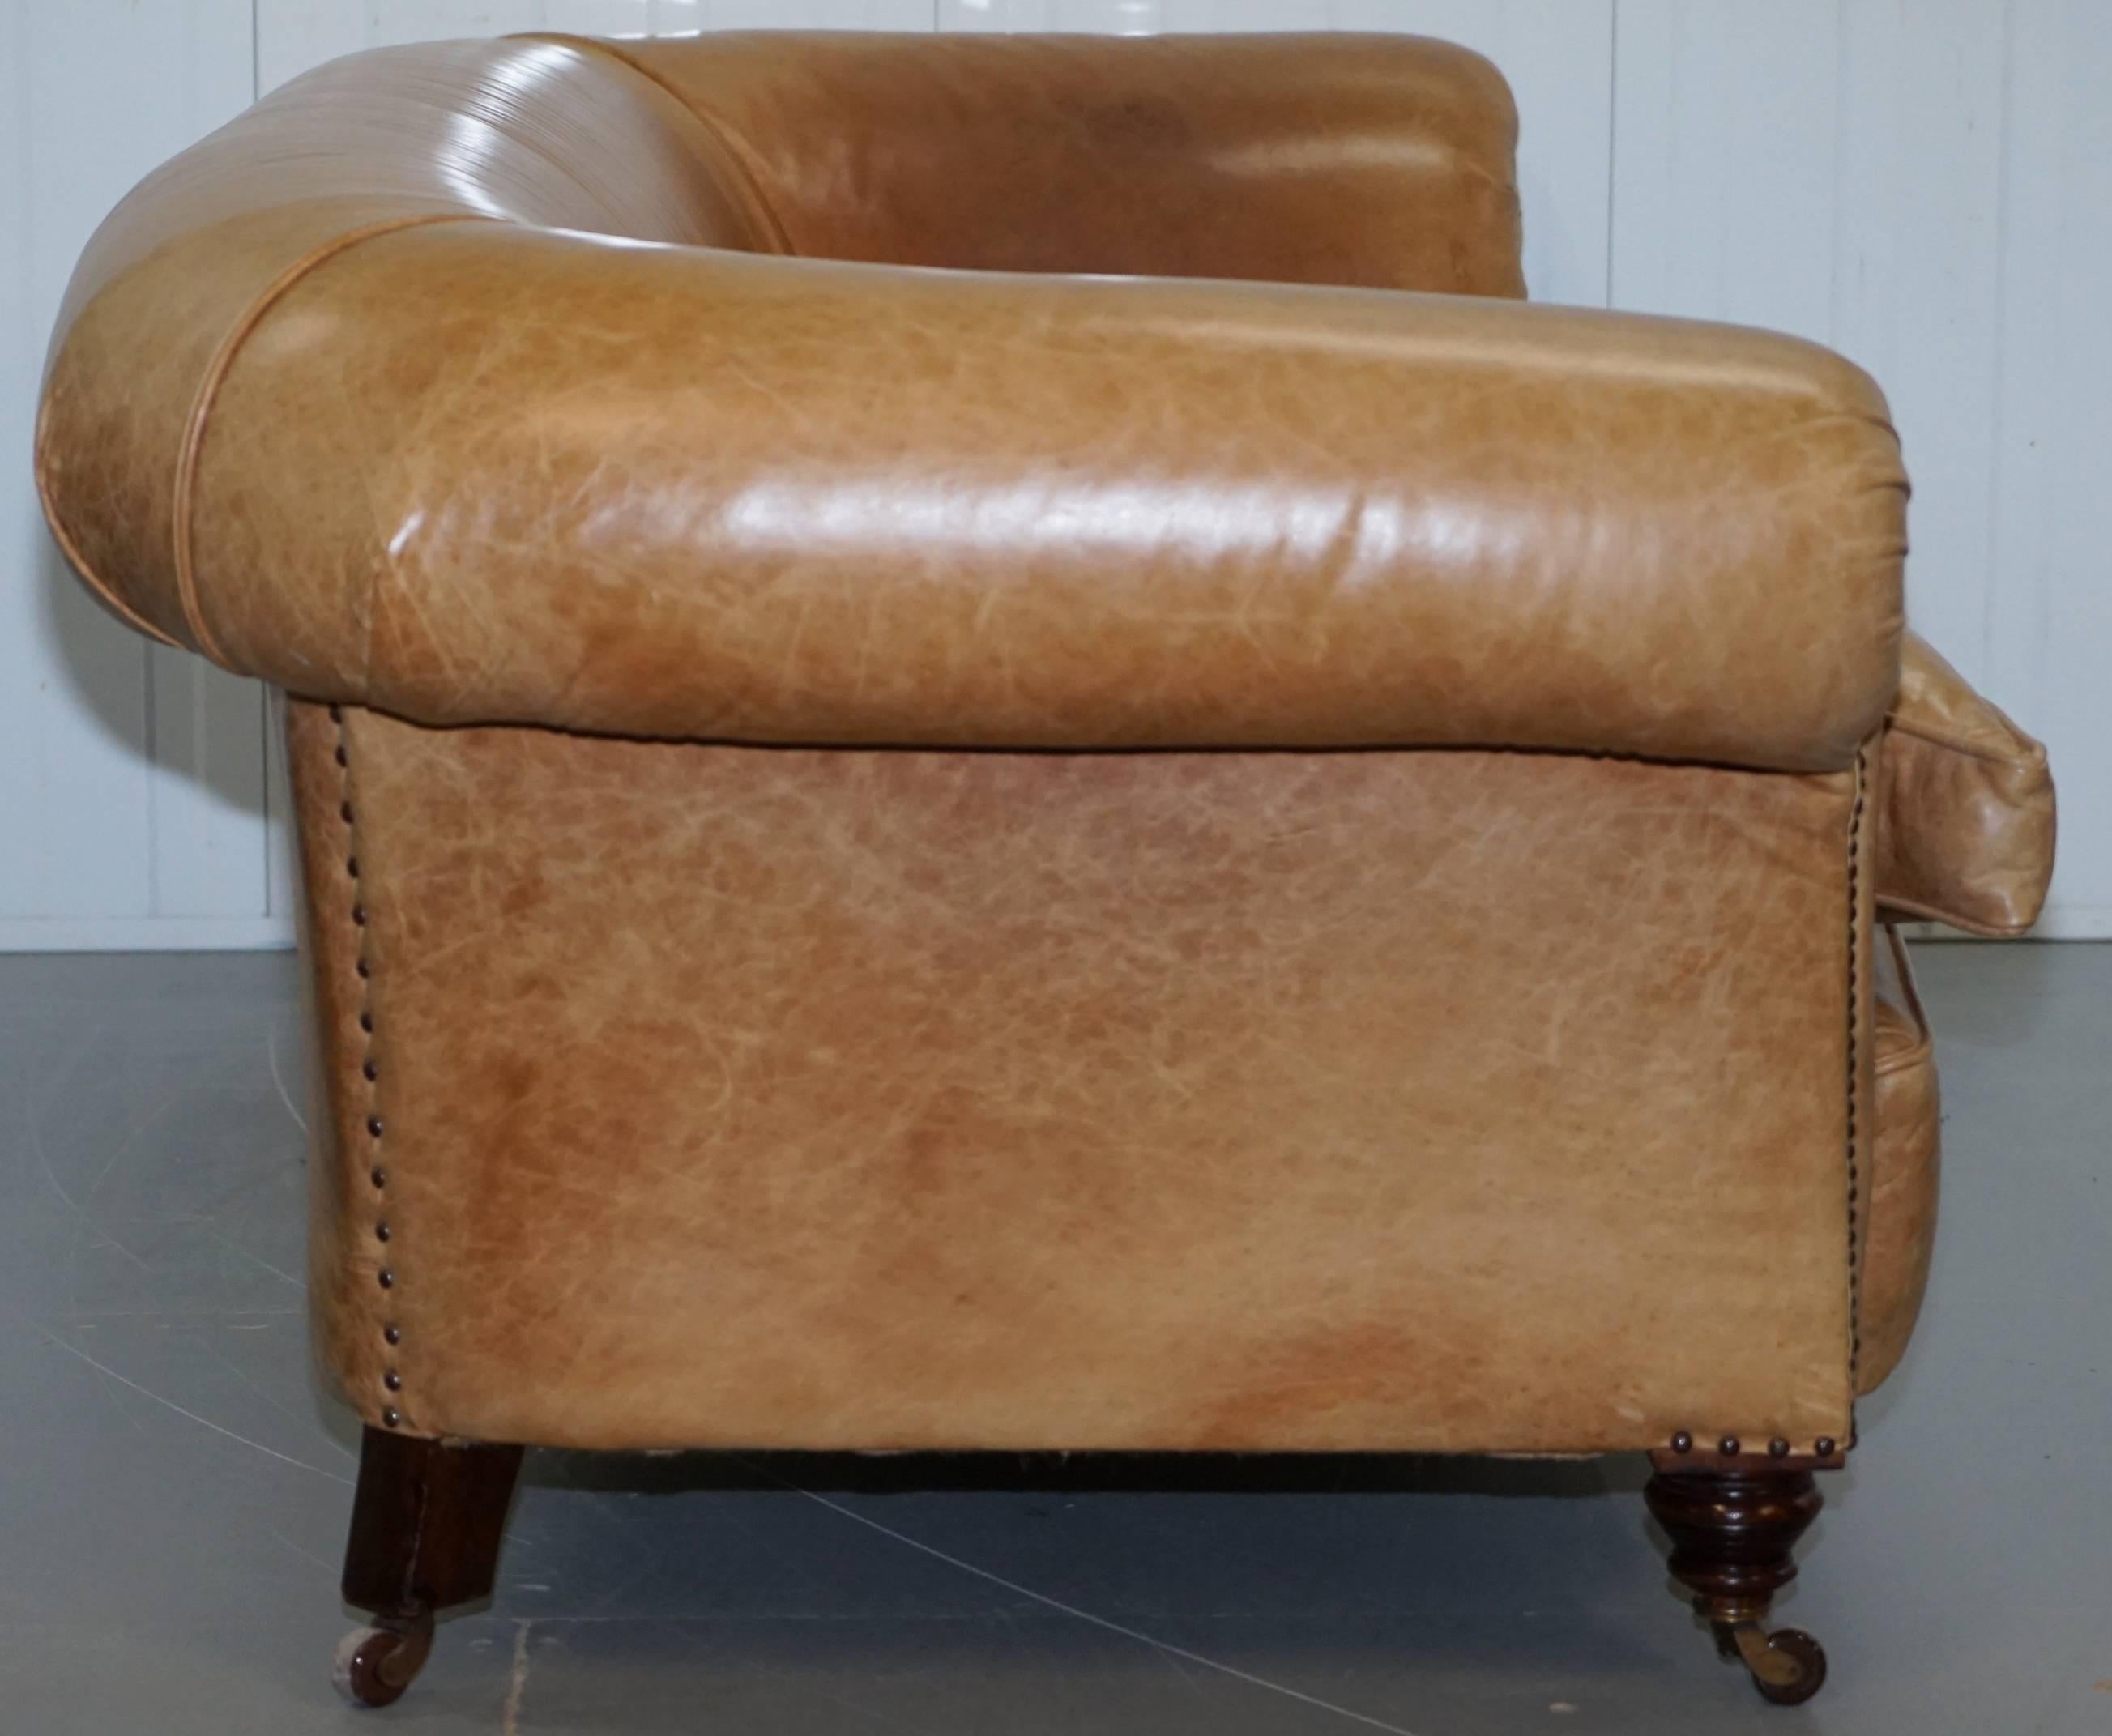 1 of 2 Victorian Brown Leather Sofas Stamped Back Leg Coil Sprung Feather Filled 5